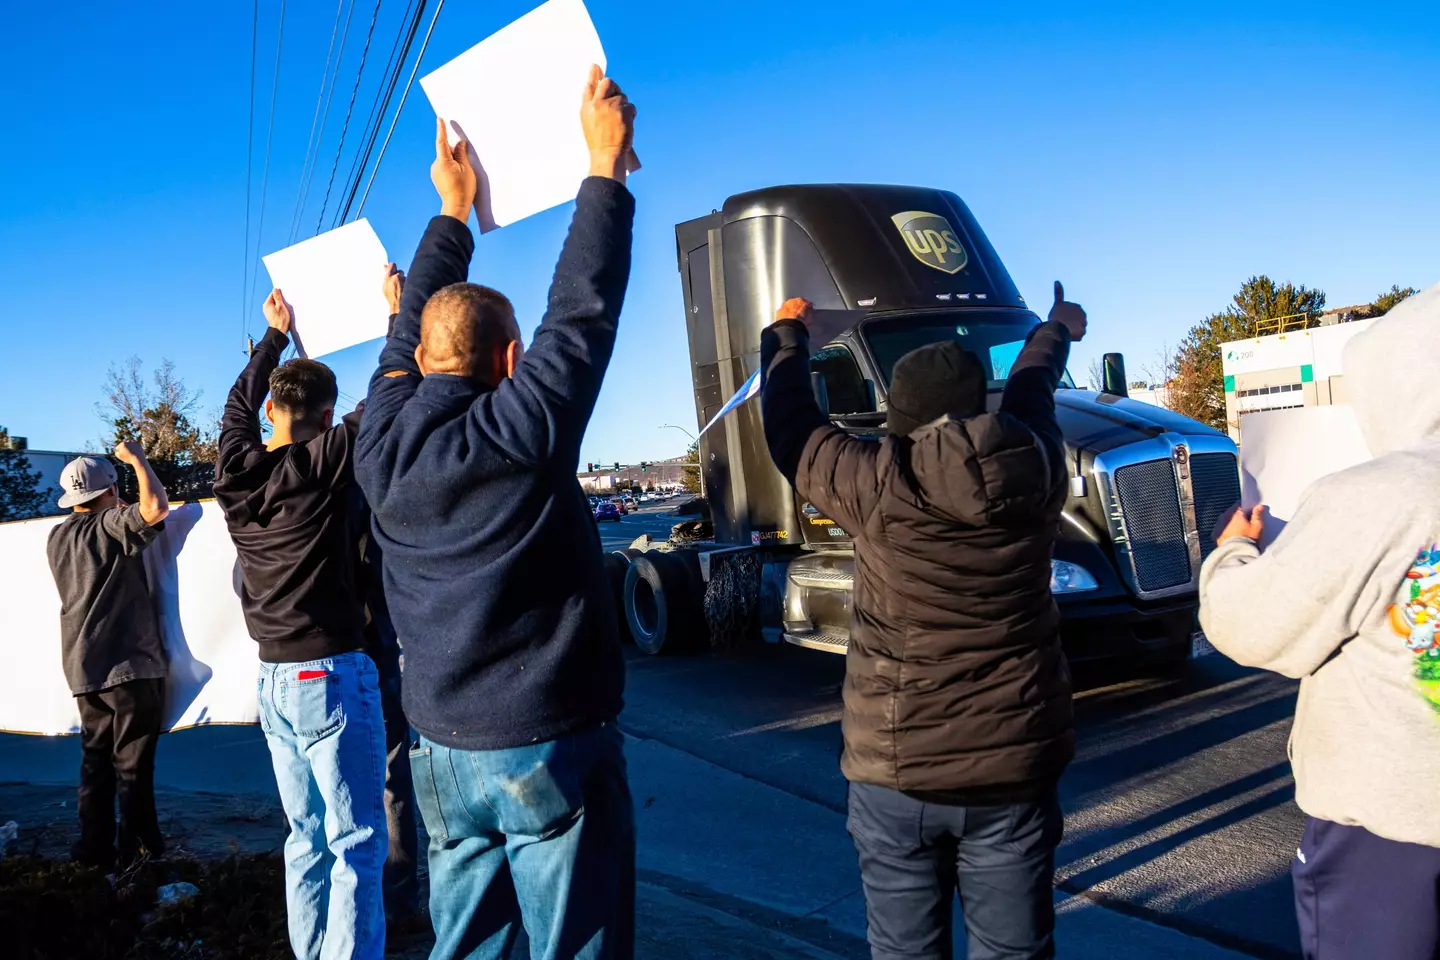 The Teamsters deal managed to prevent a strike.